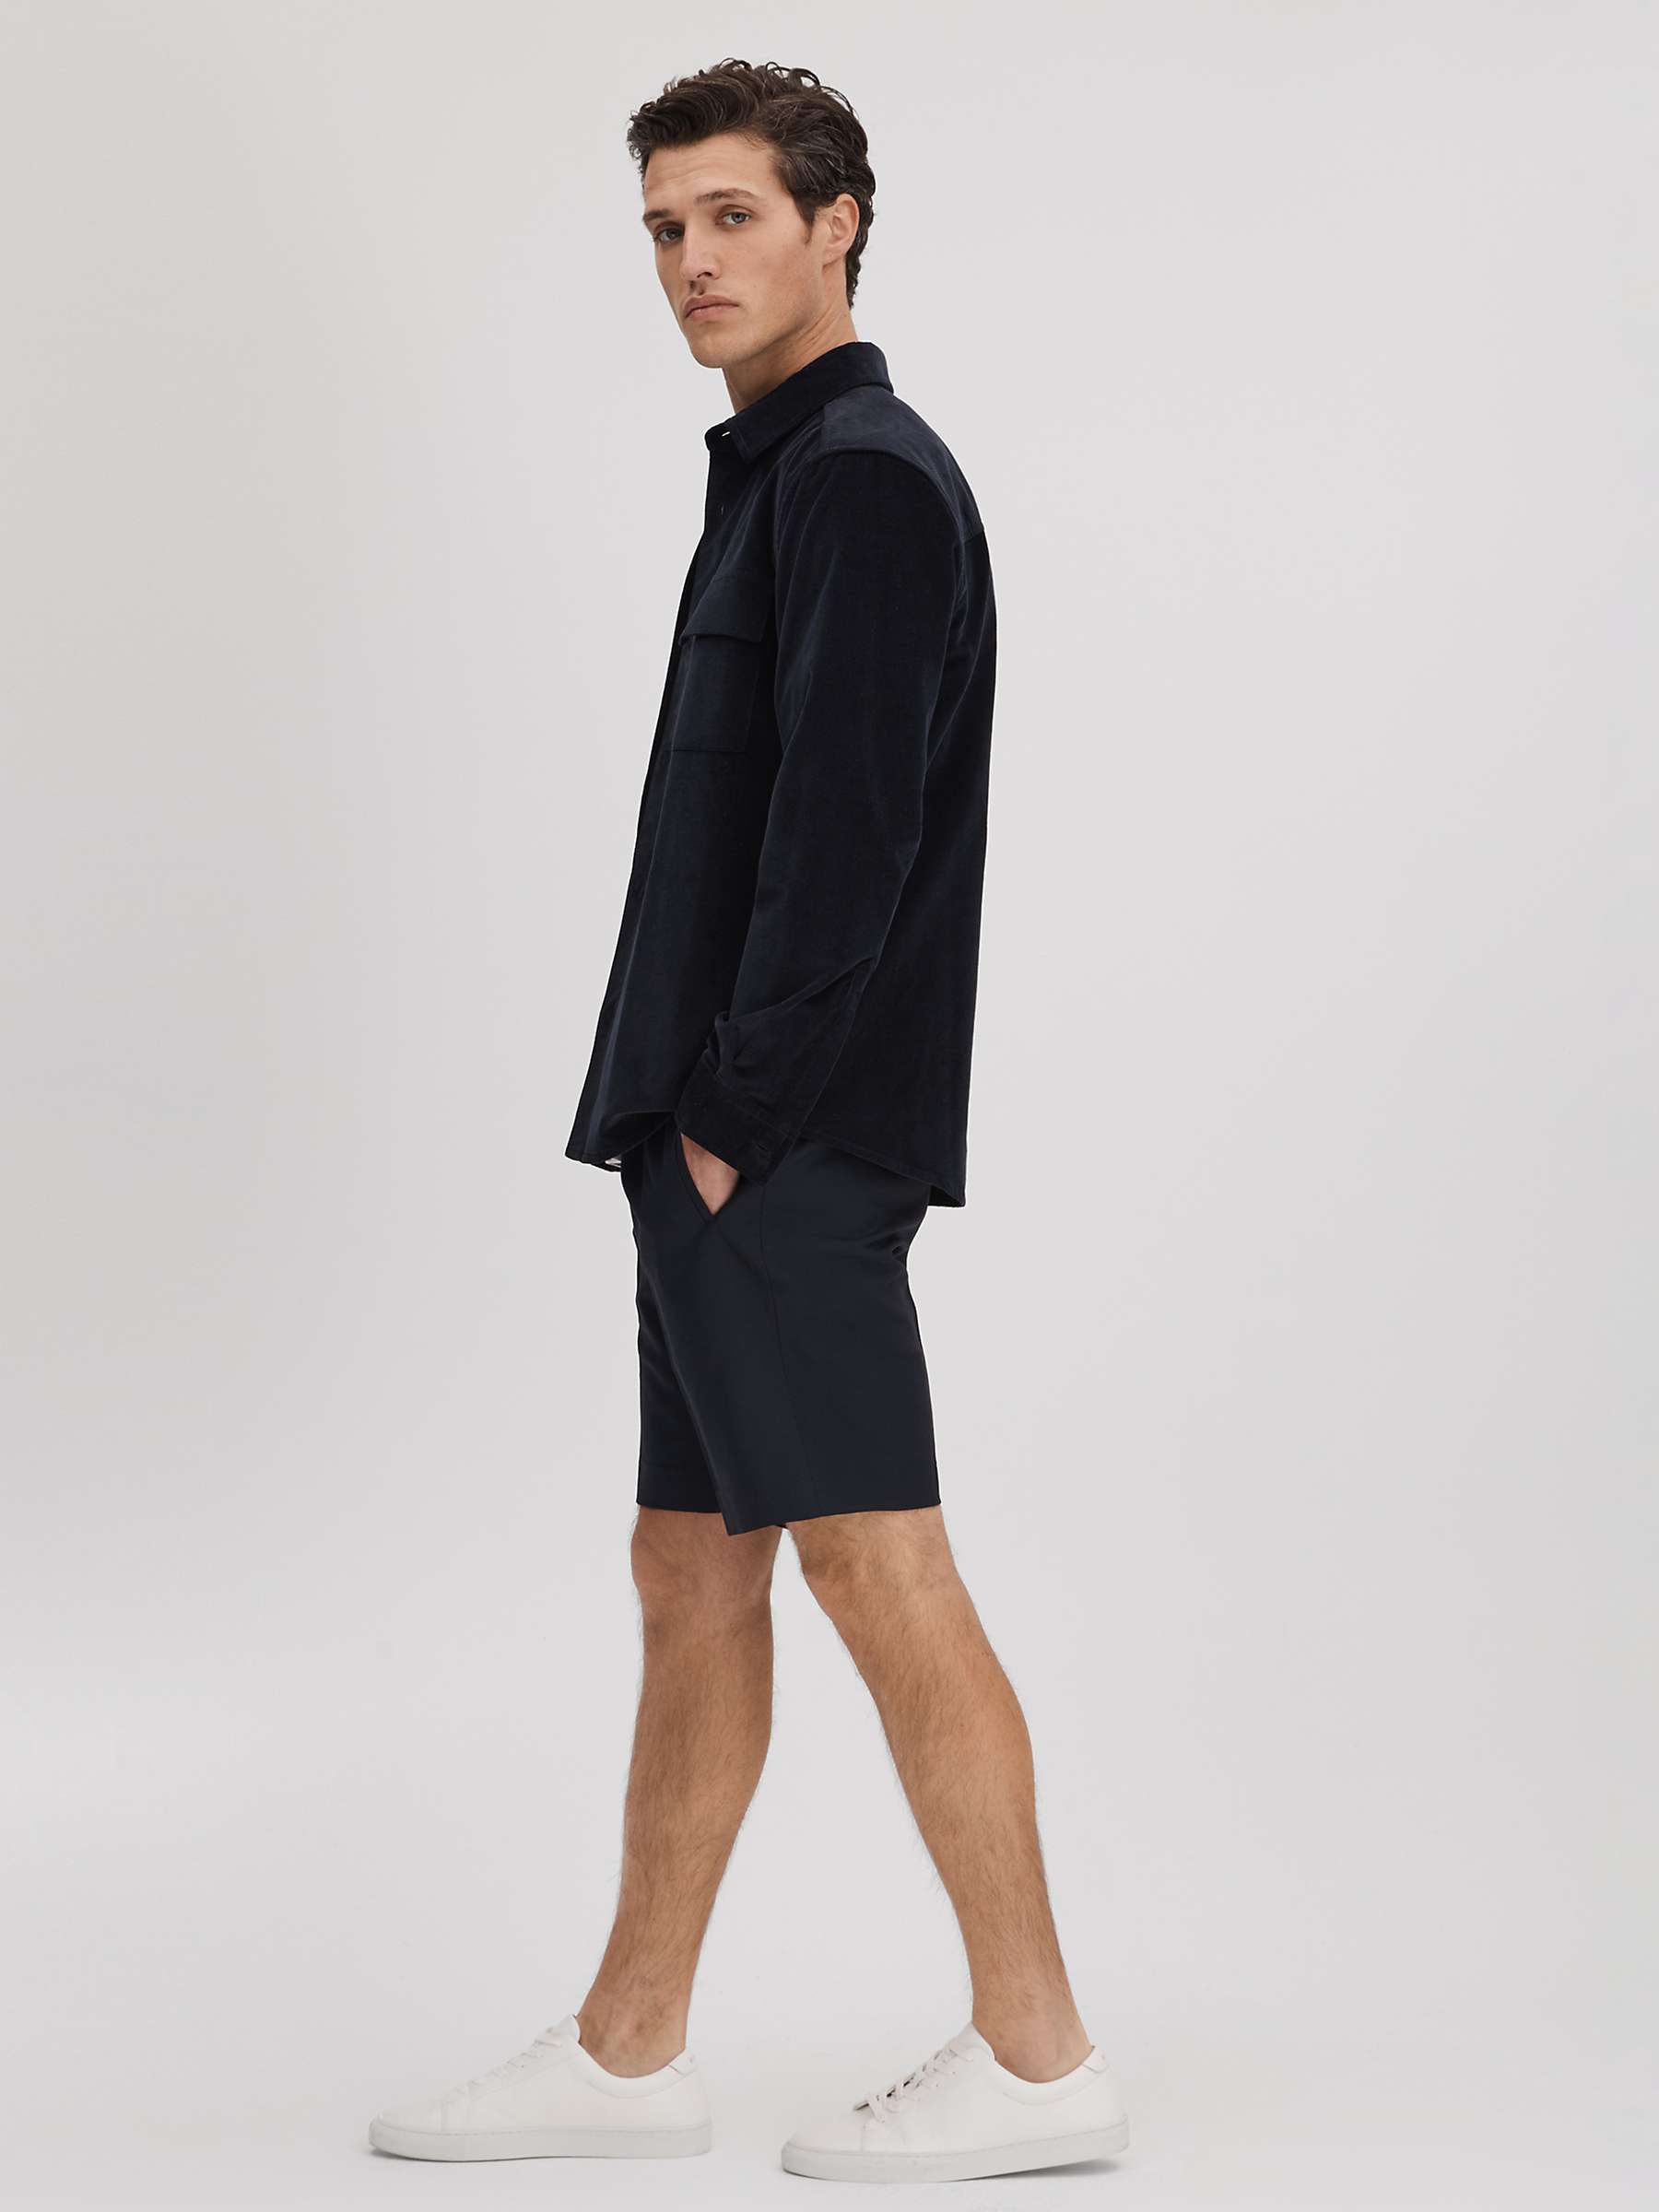 Buy Reiss Sussex Shorts Online at johnlewis.com